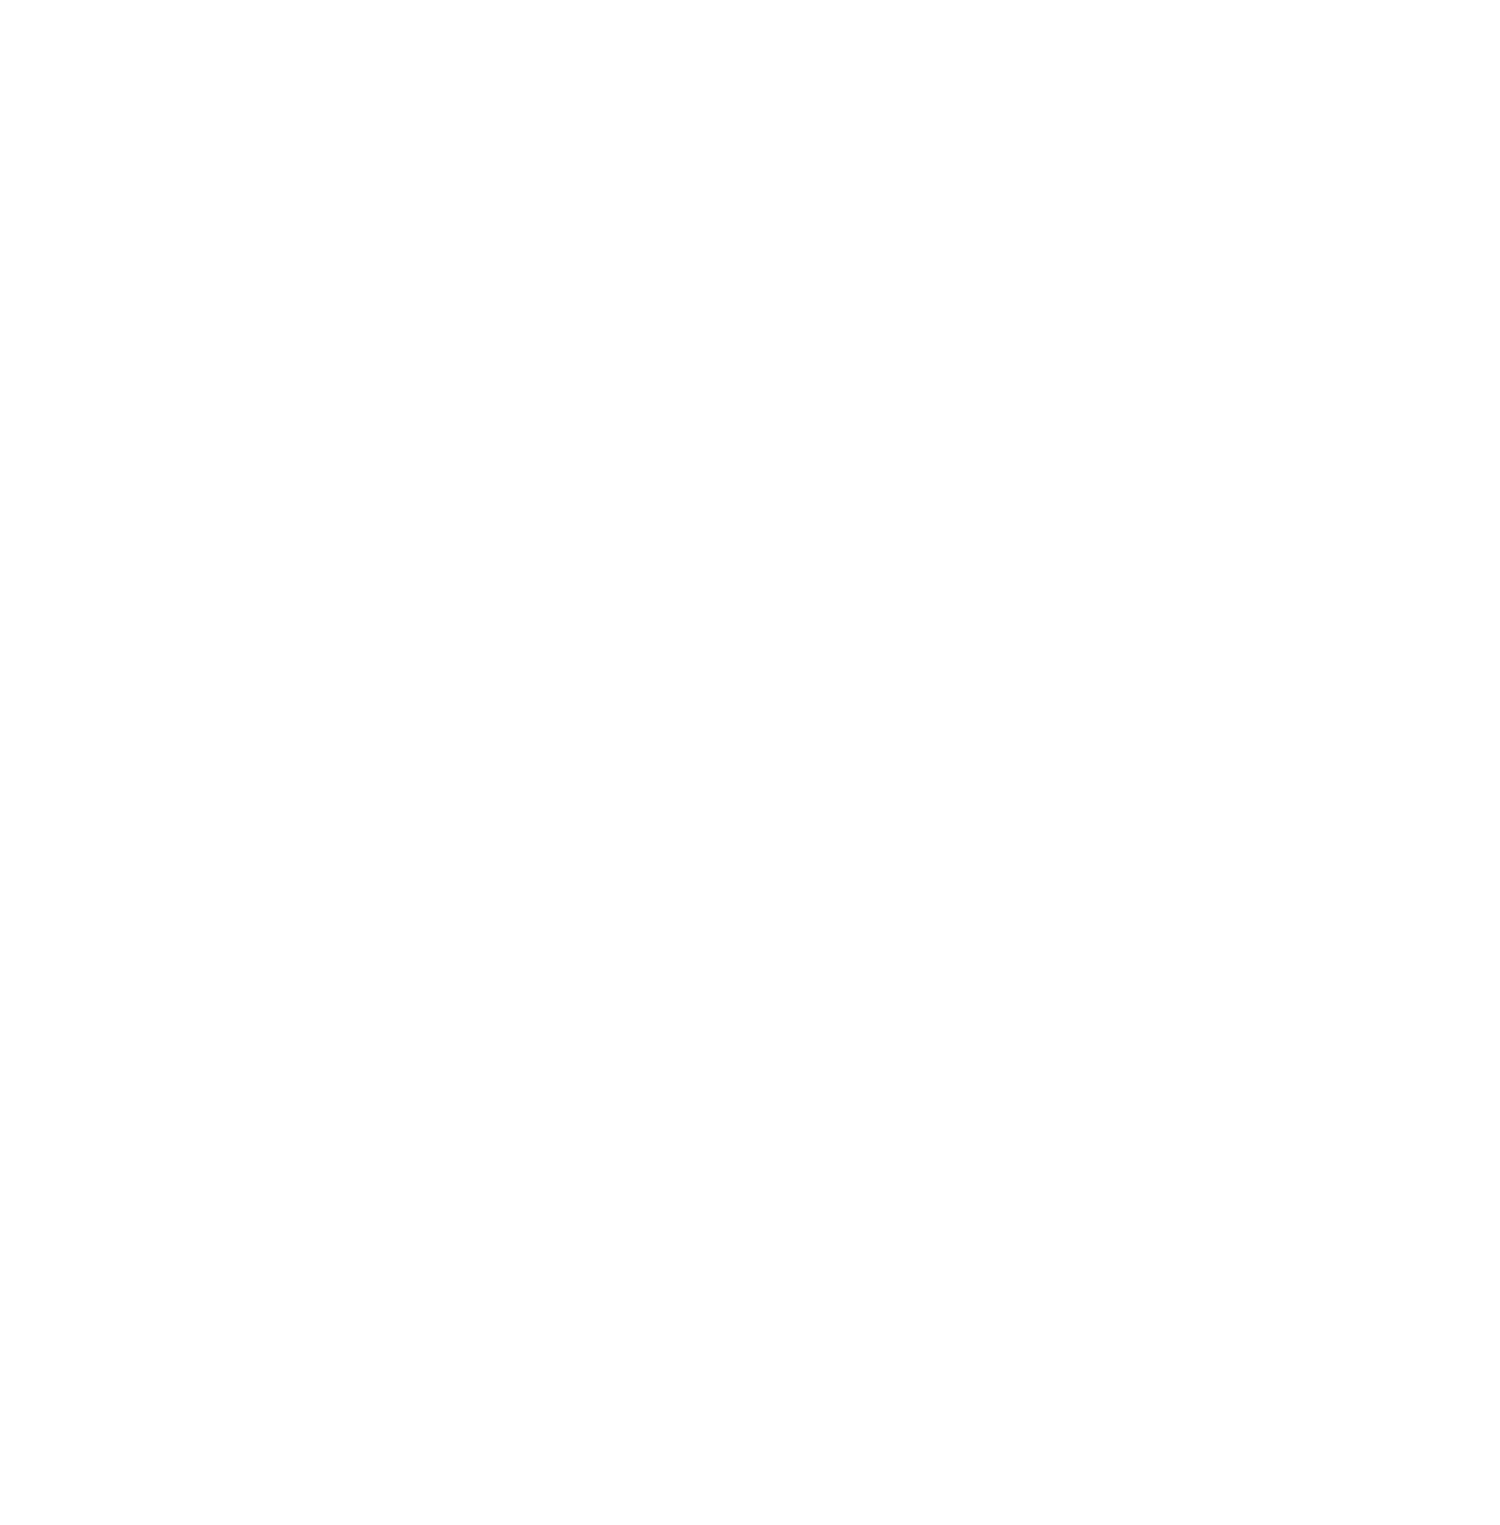 the mindful | nest